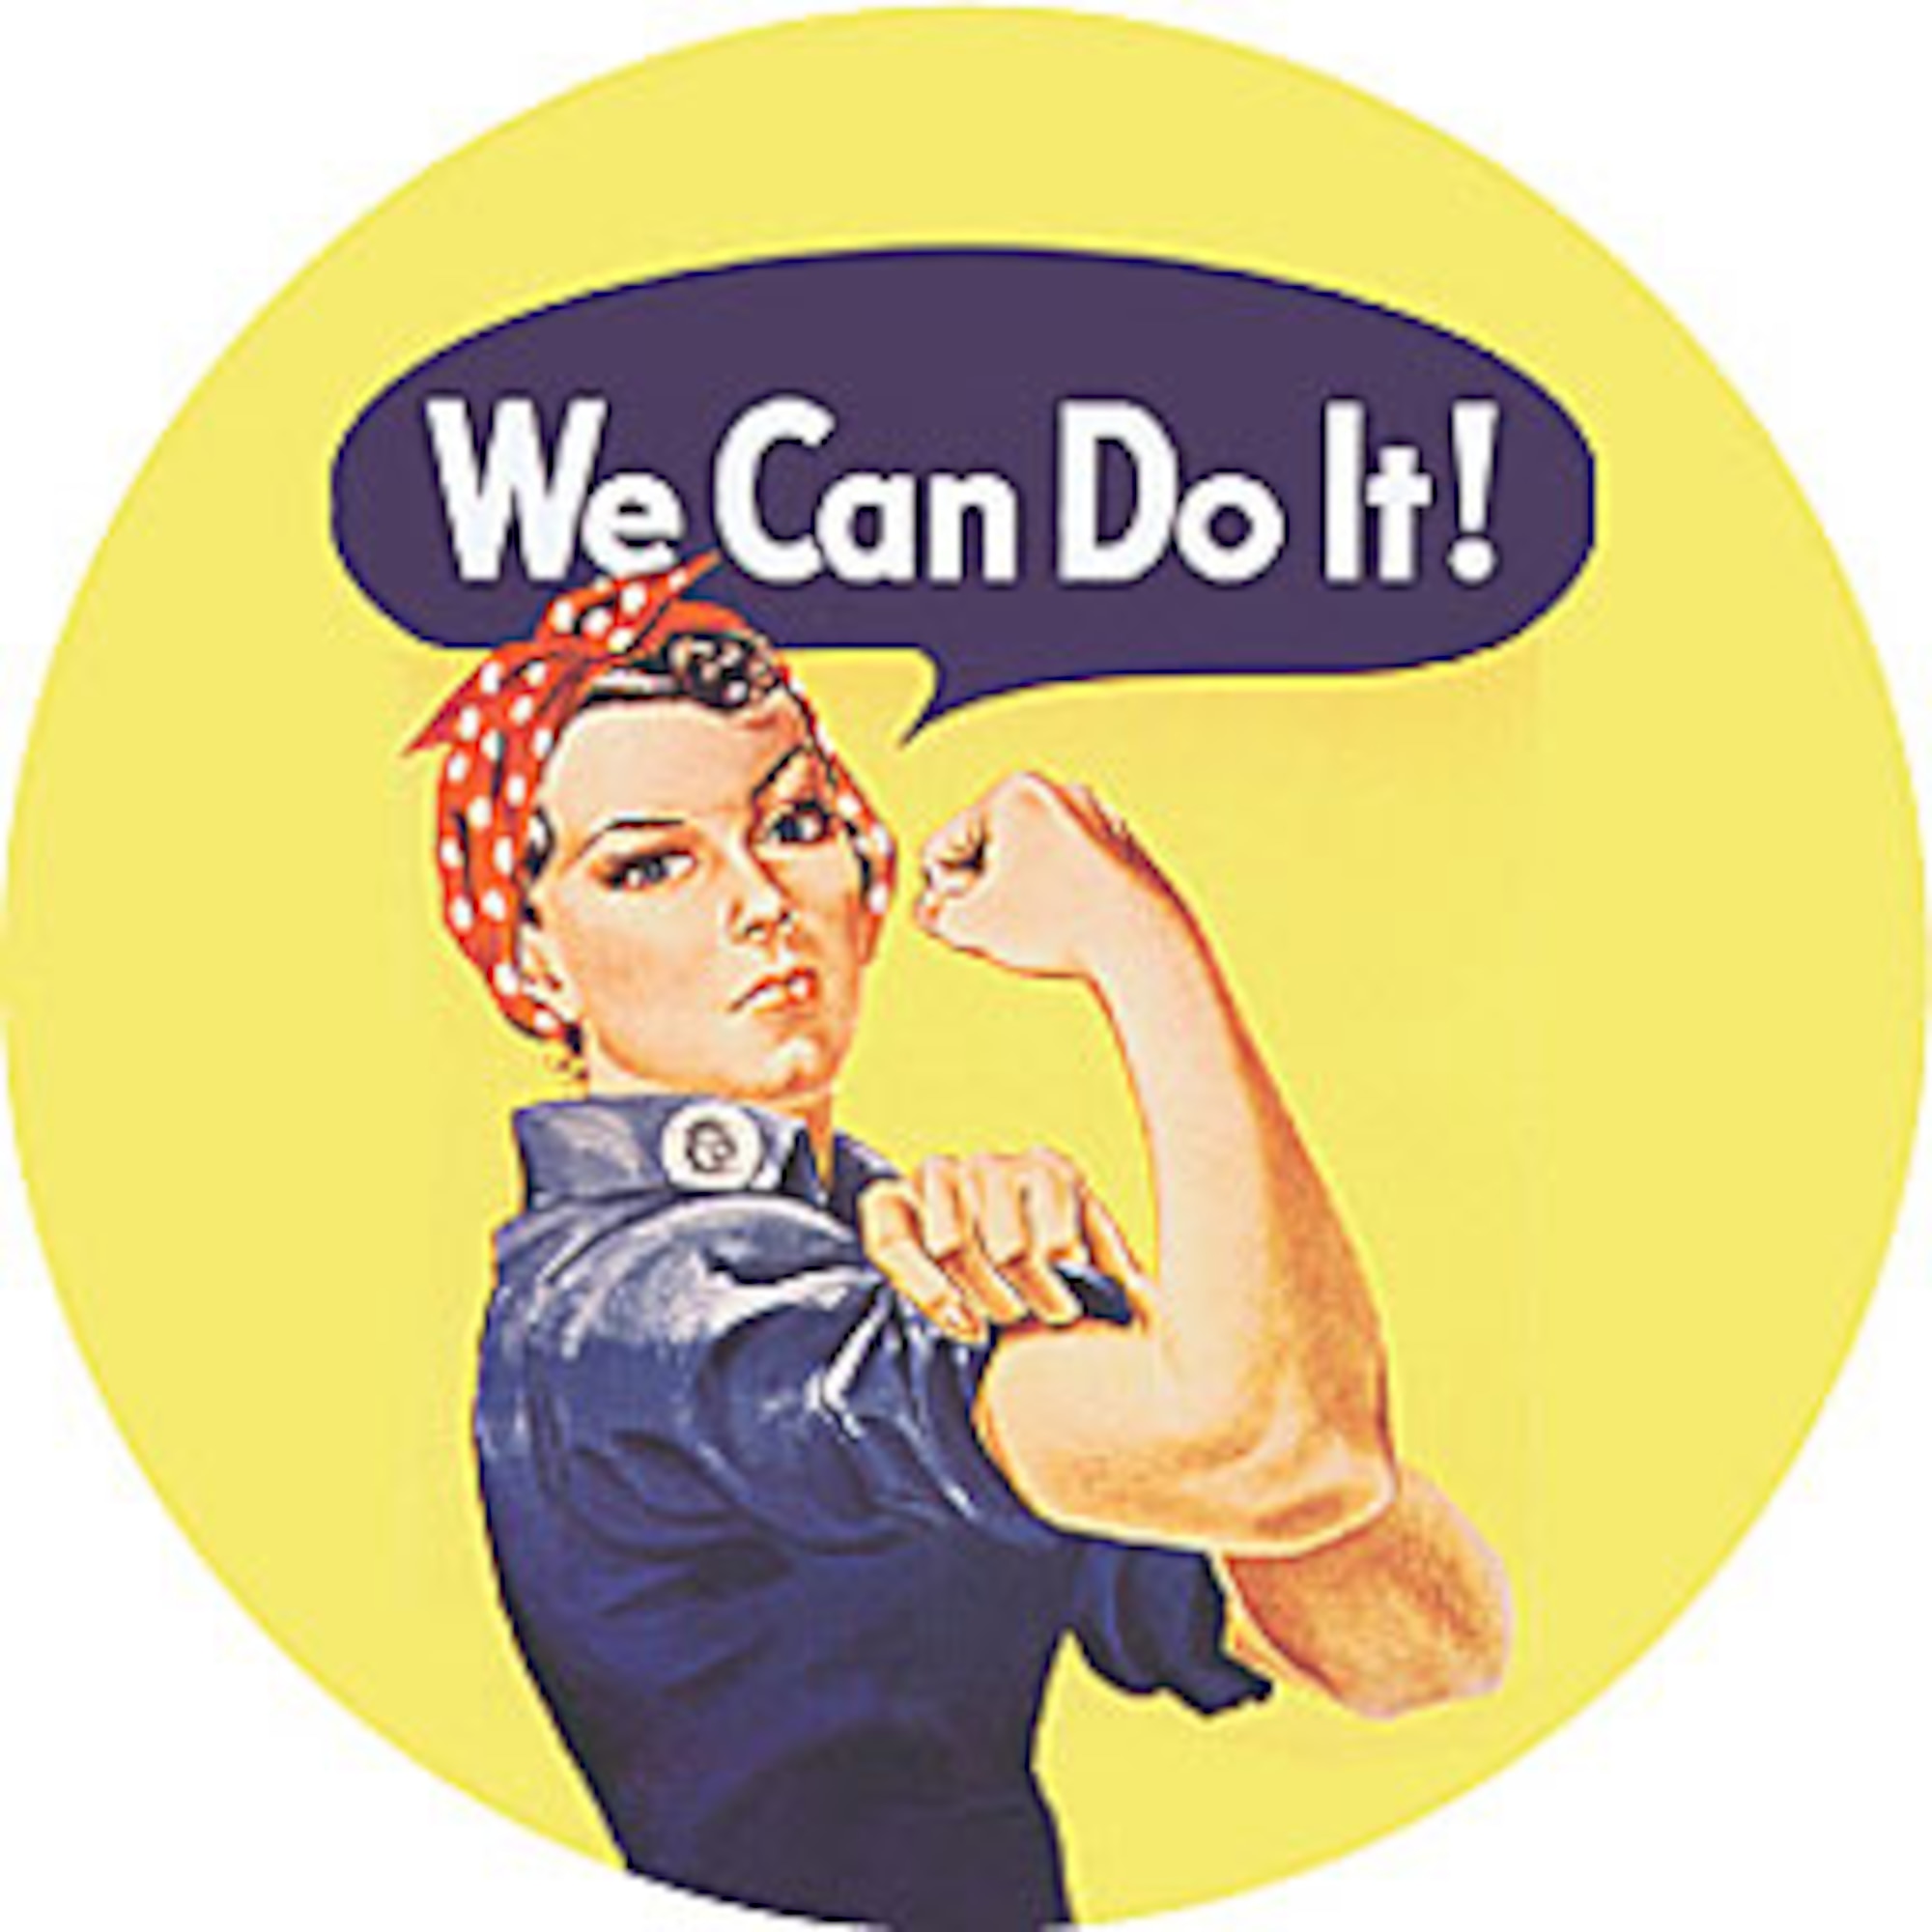 Rosie The Riveter 'who Inspired Get Women Working' Poster Dies